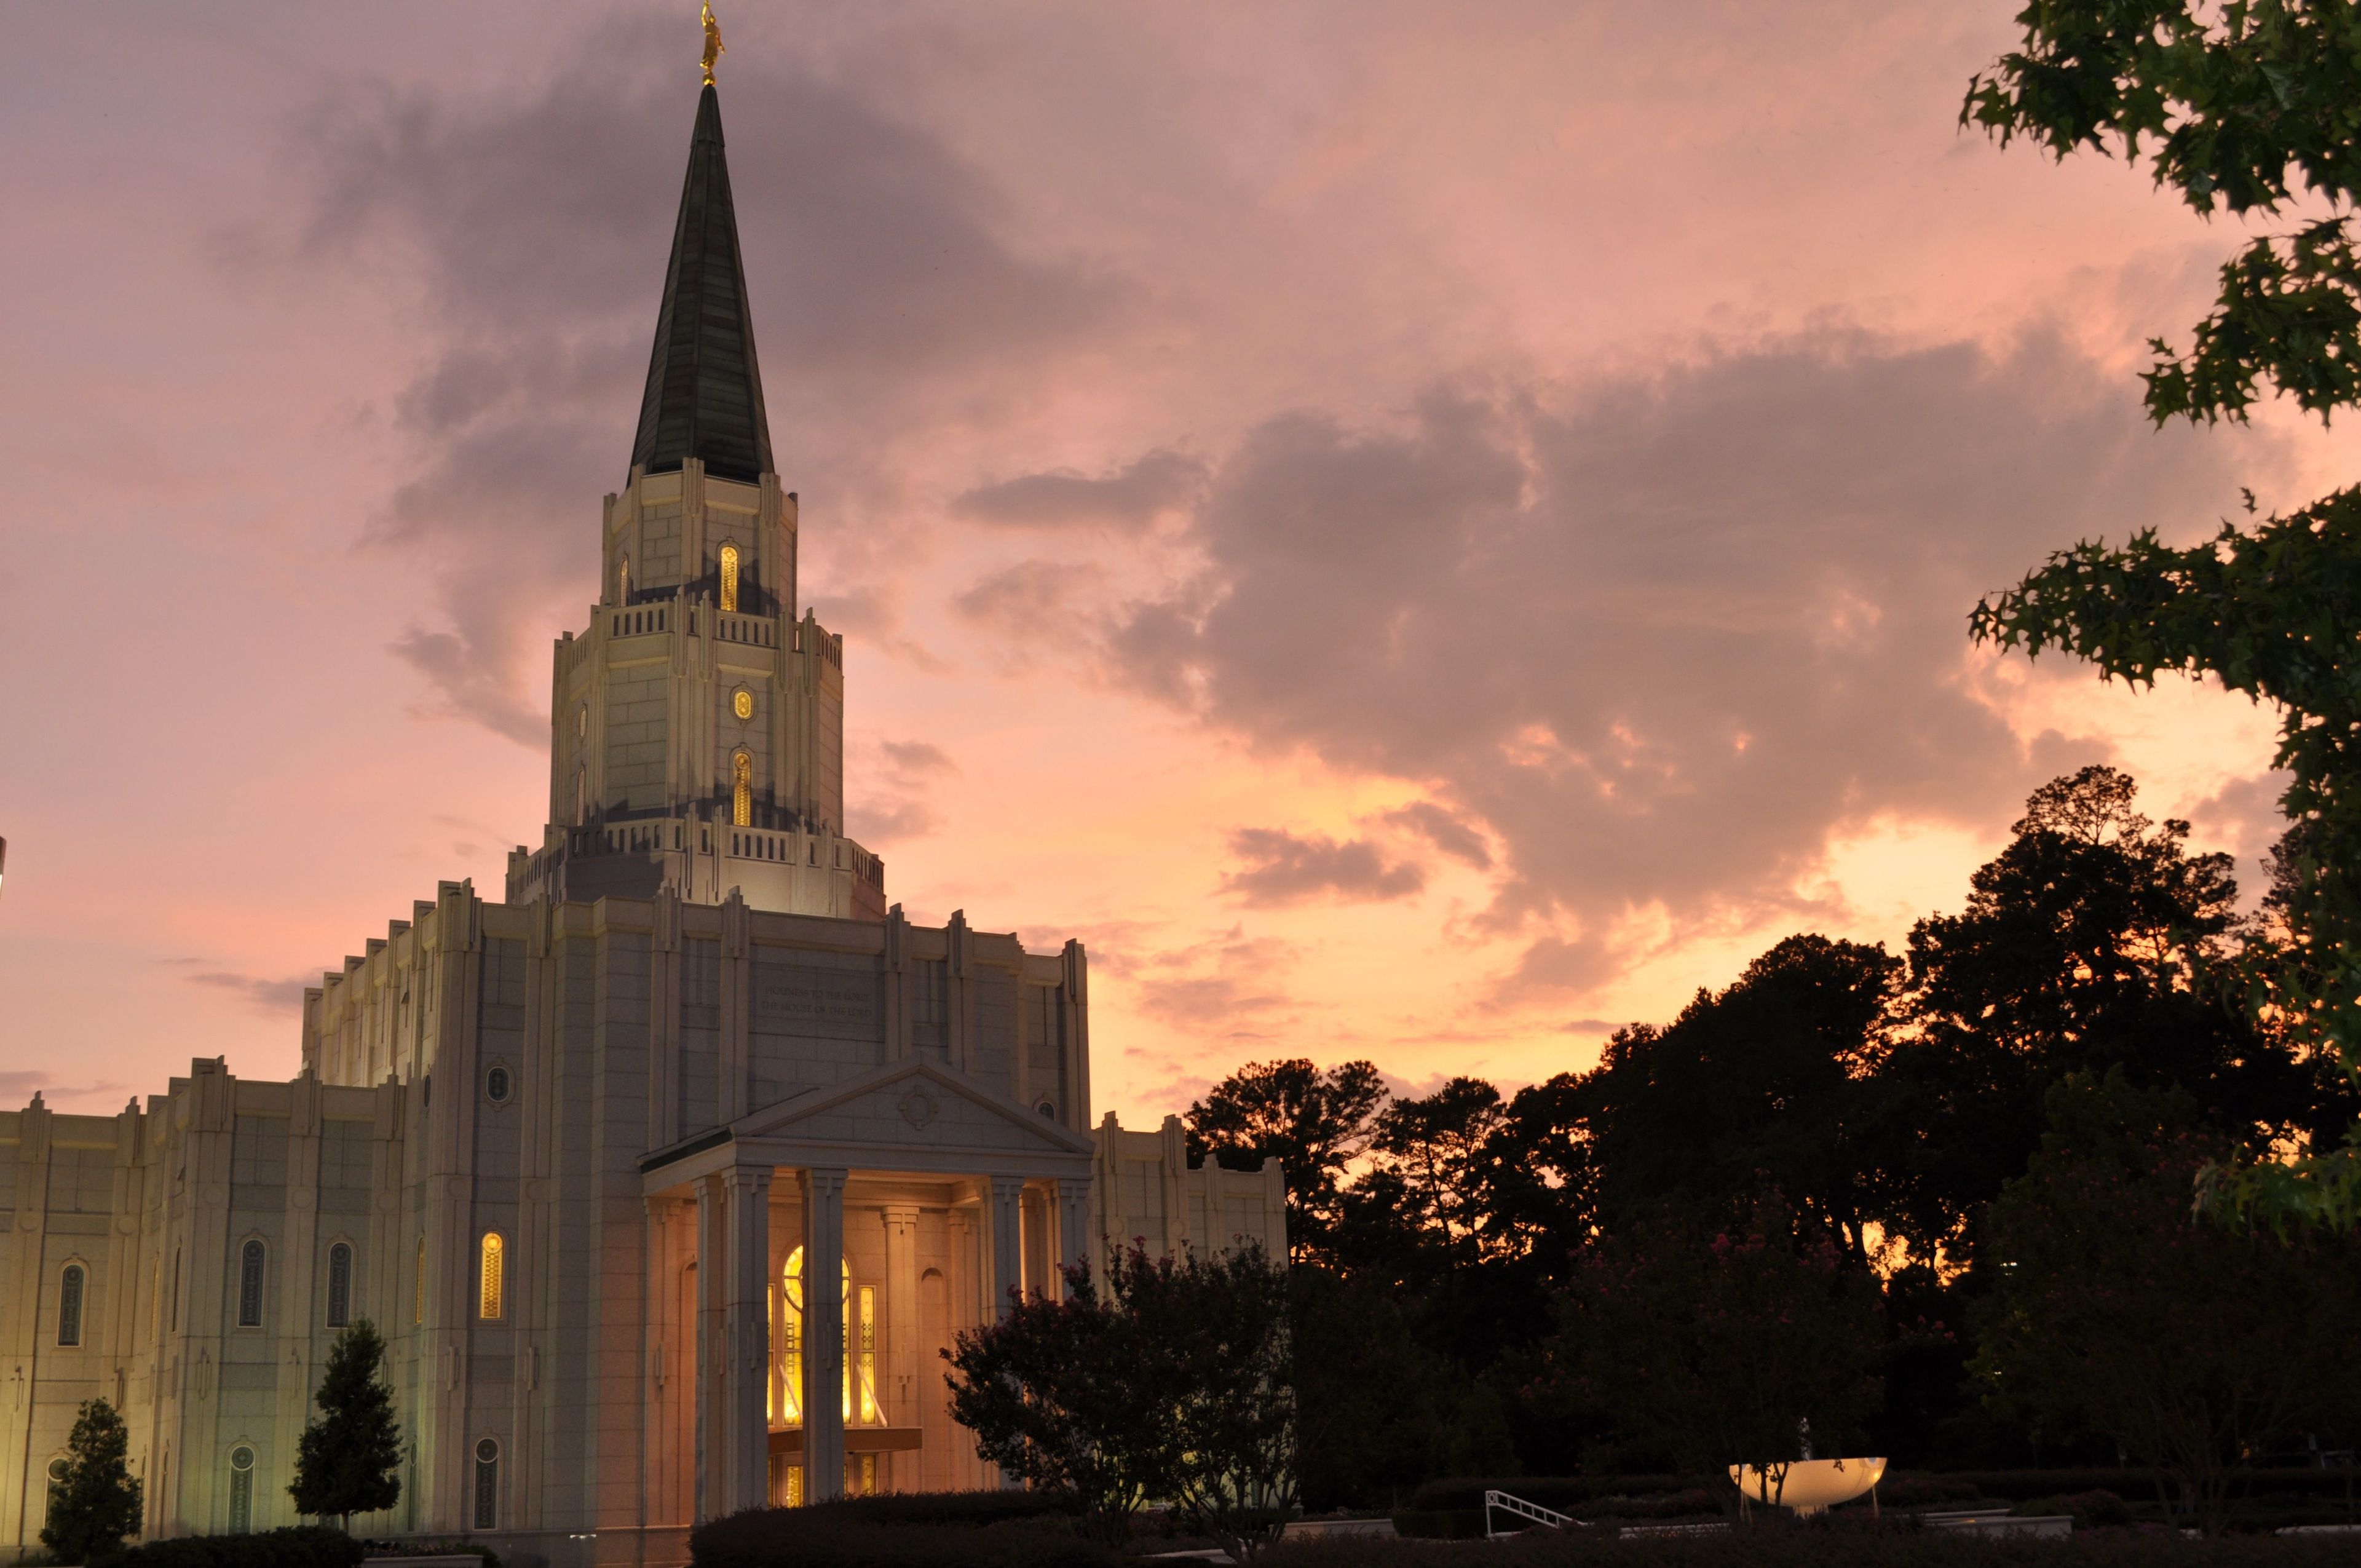 An exterior view of the Houston Texas Temple at sunset.